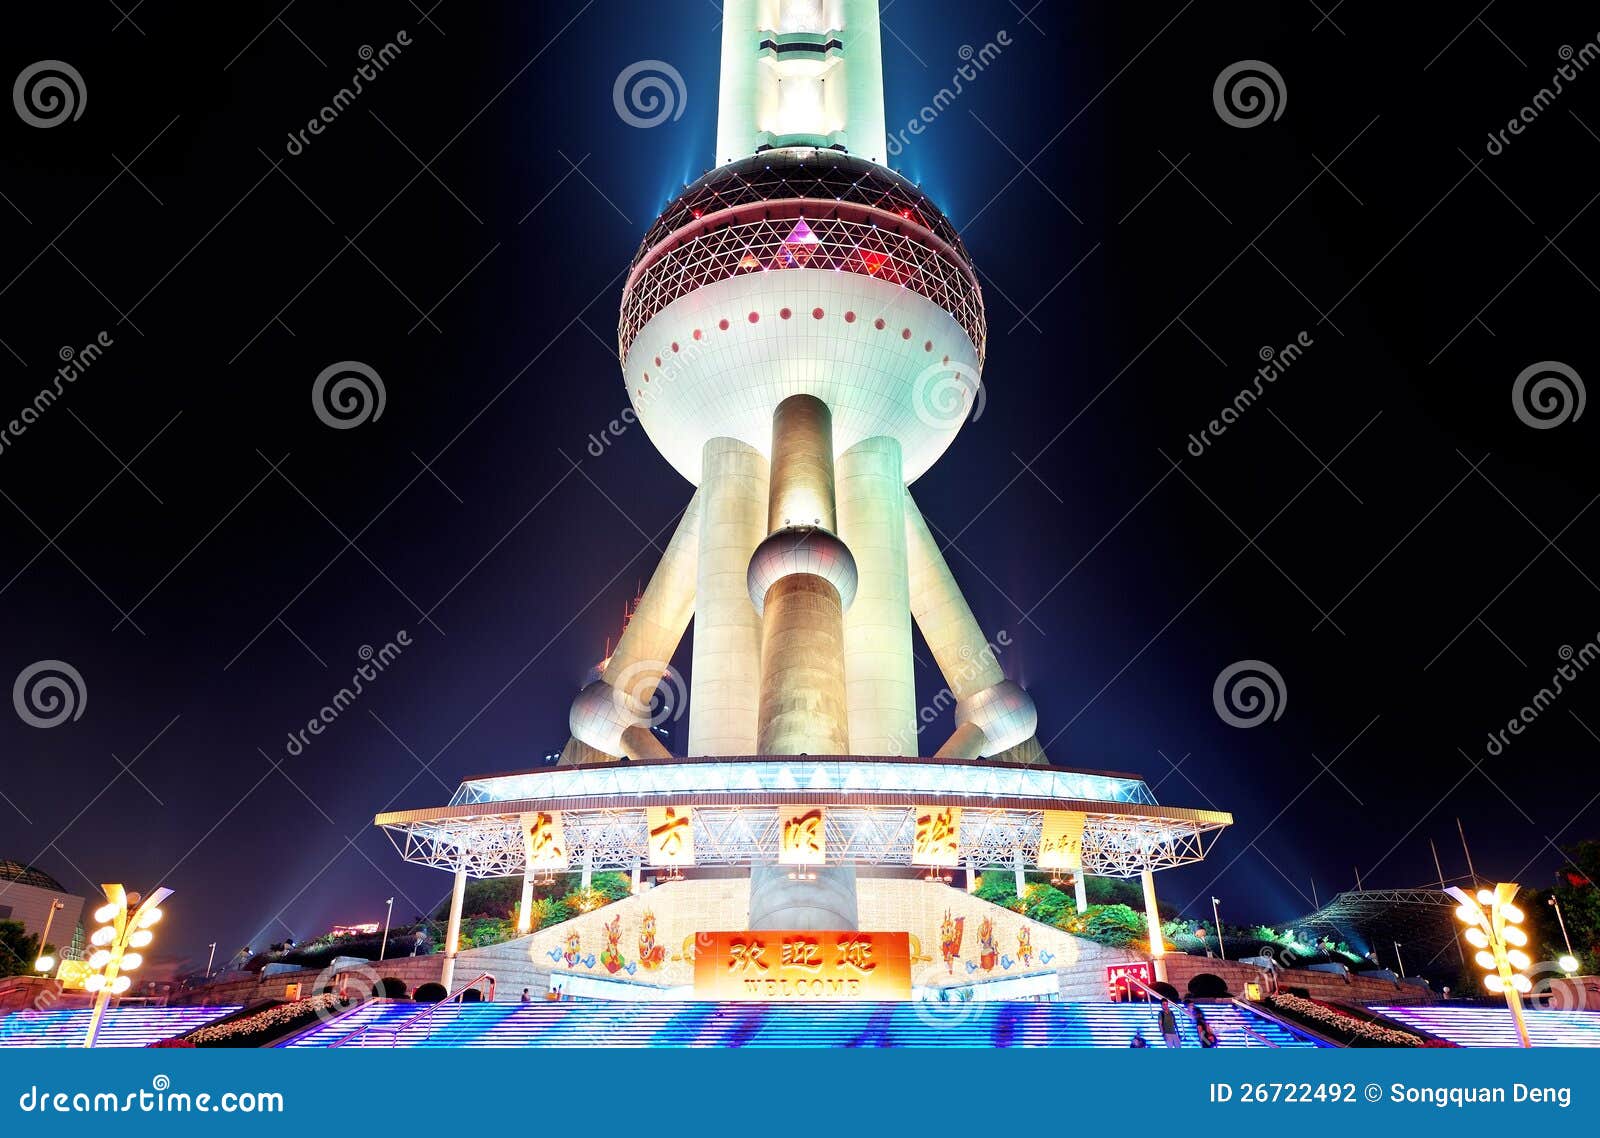 SHANGHAI, CHINA - MAY 28: Oriental Pearl Tower closeup on May 28, 2012 in Shanghai, China. The tower was the tallest structure in China excluding Taiwan from 1994-2007 and the landmark of Shanghai.